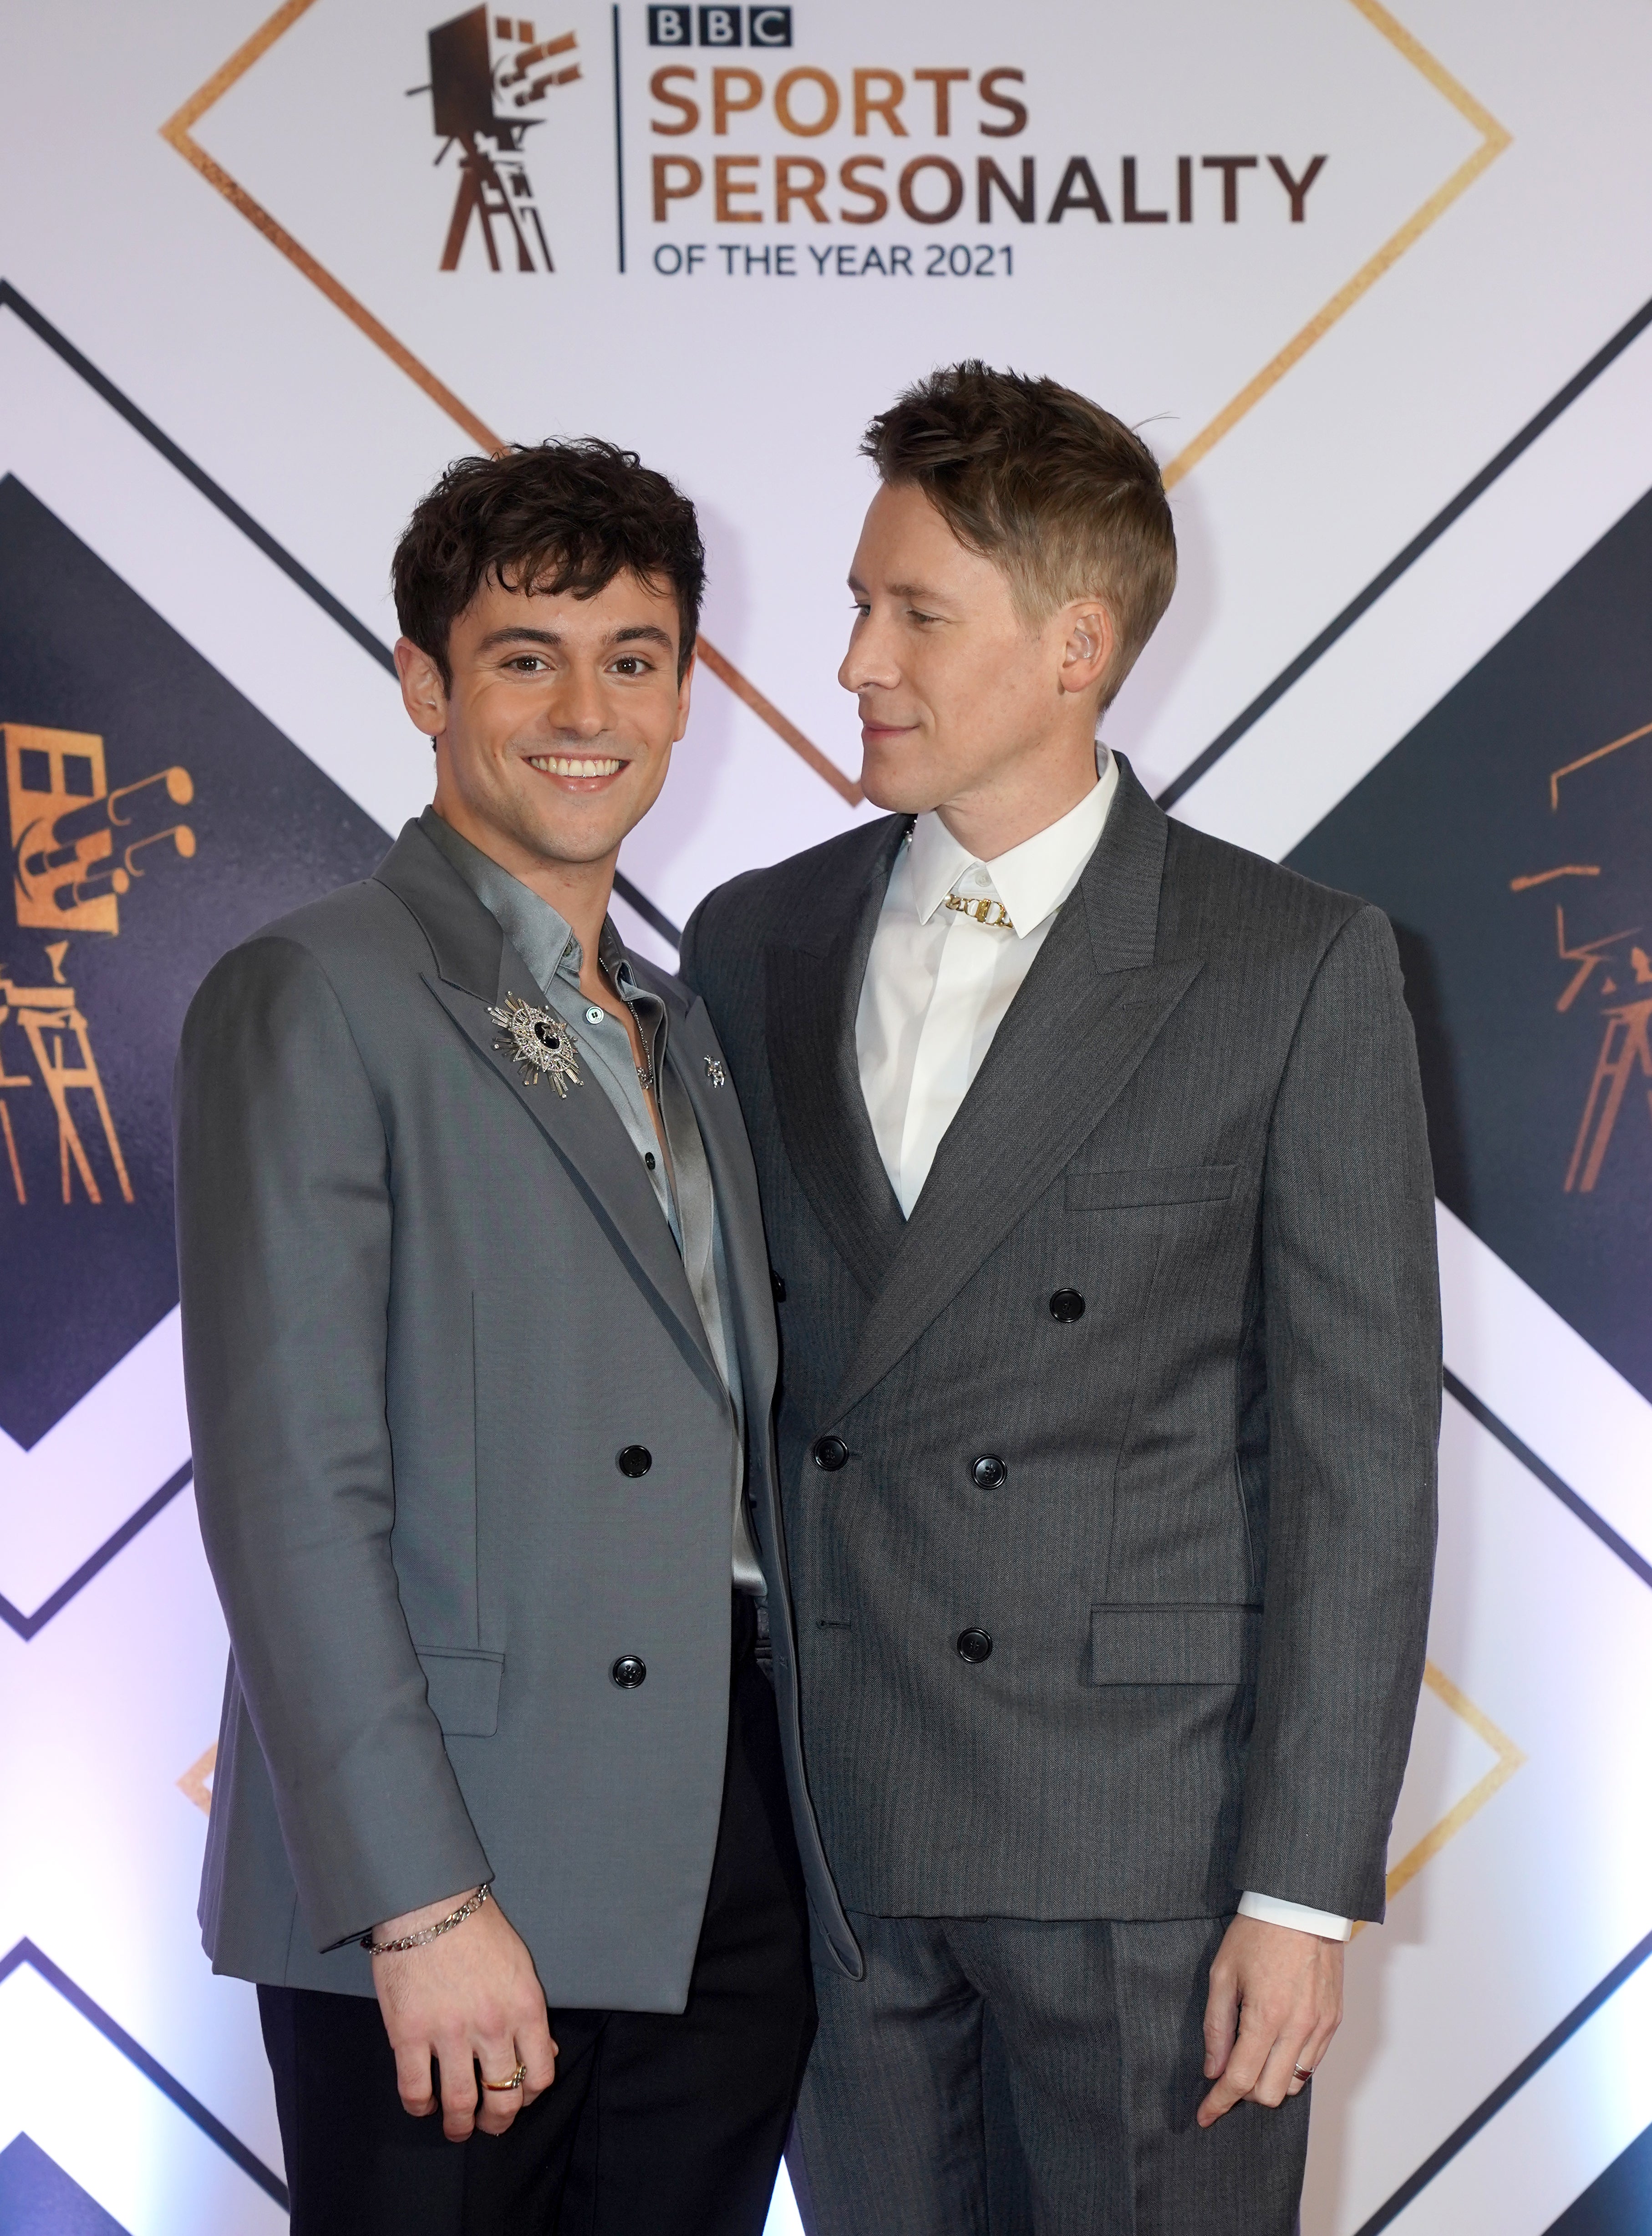 Tom Daley, pictured with husband Dustin Lance Black, won second at the Sports Personality of the Year awards last month (David Davies/PA)